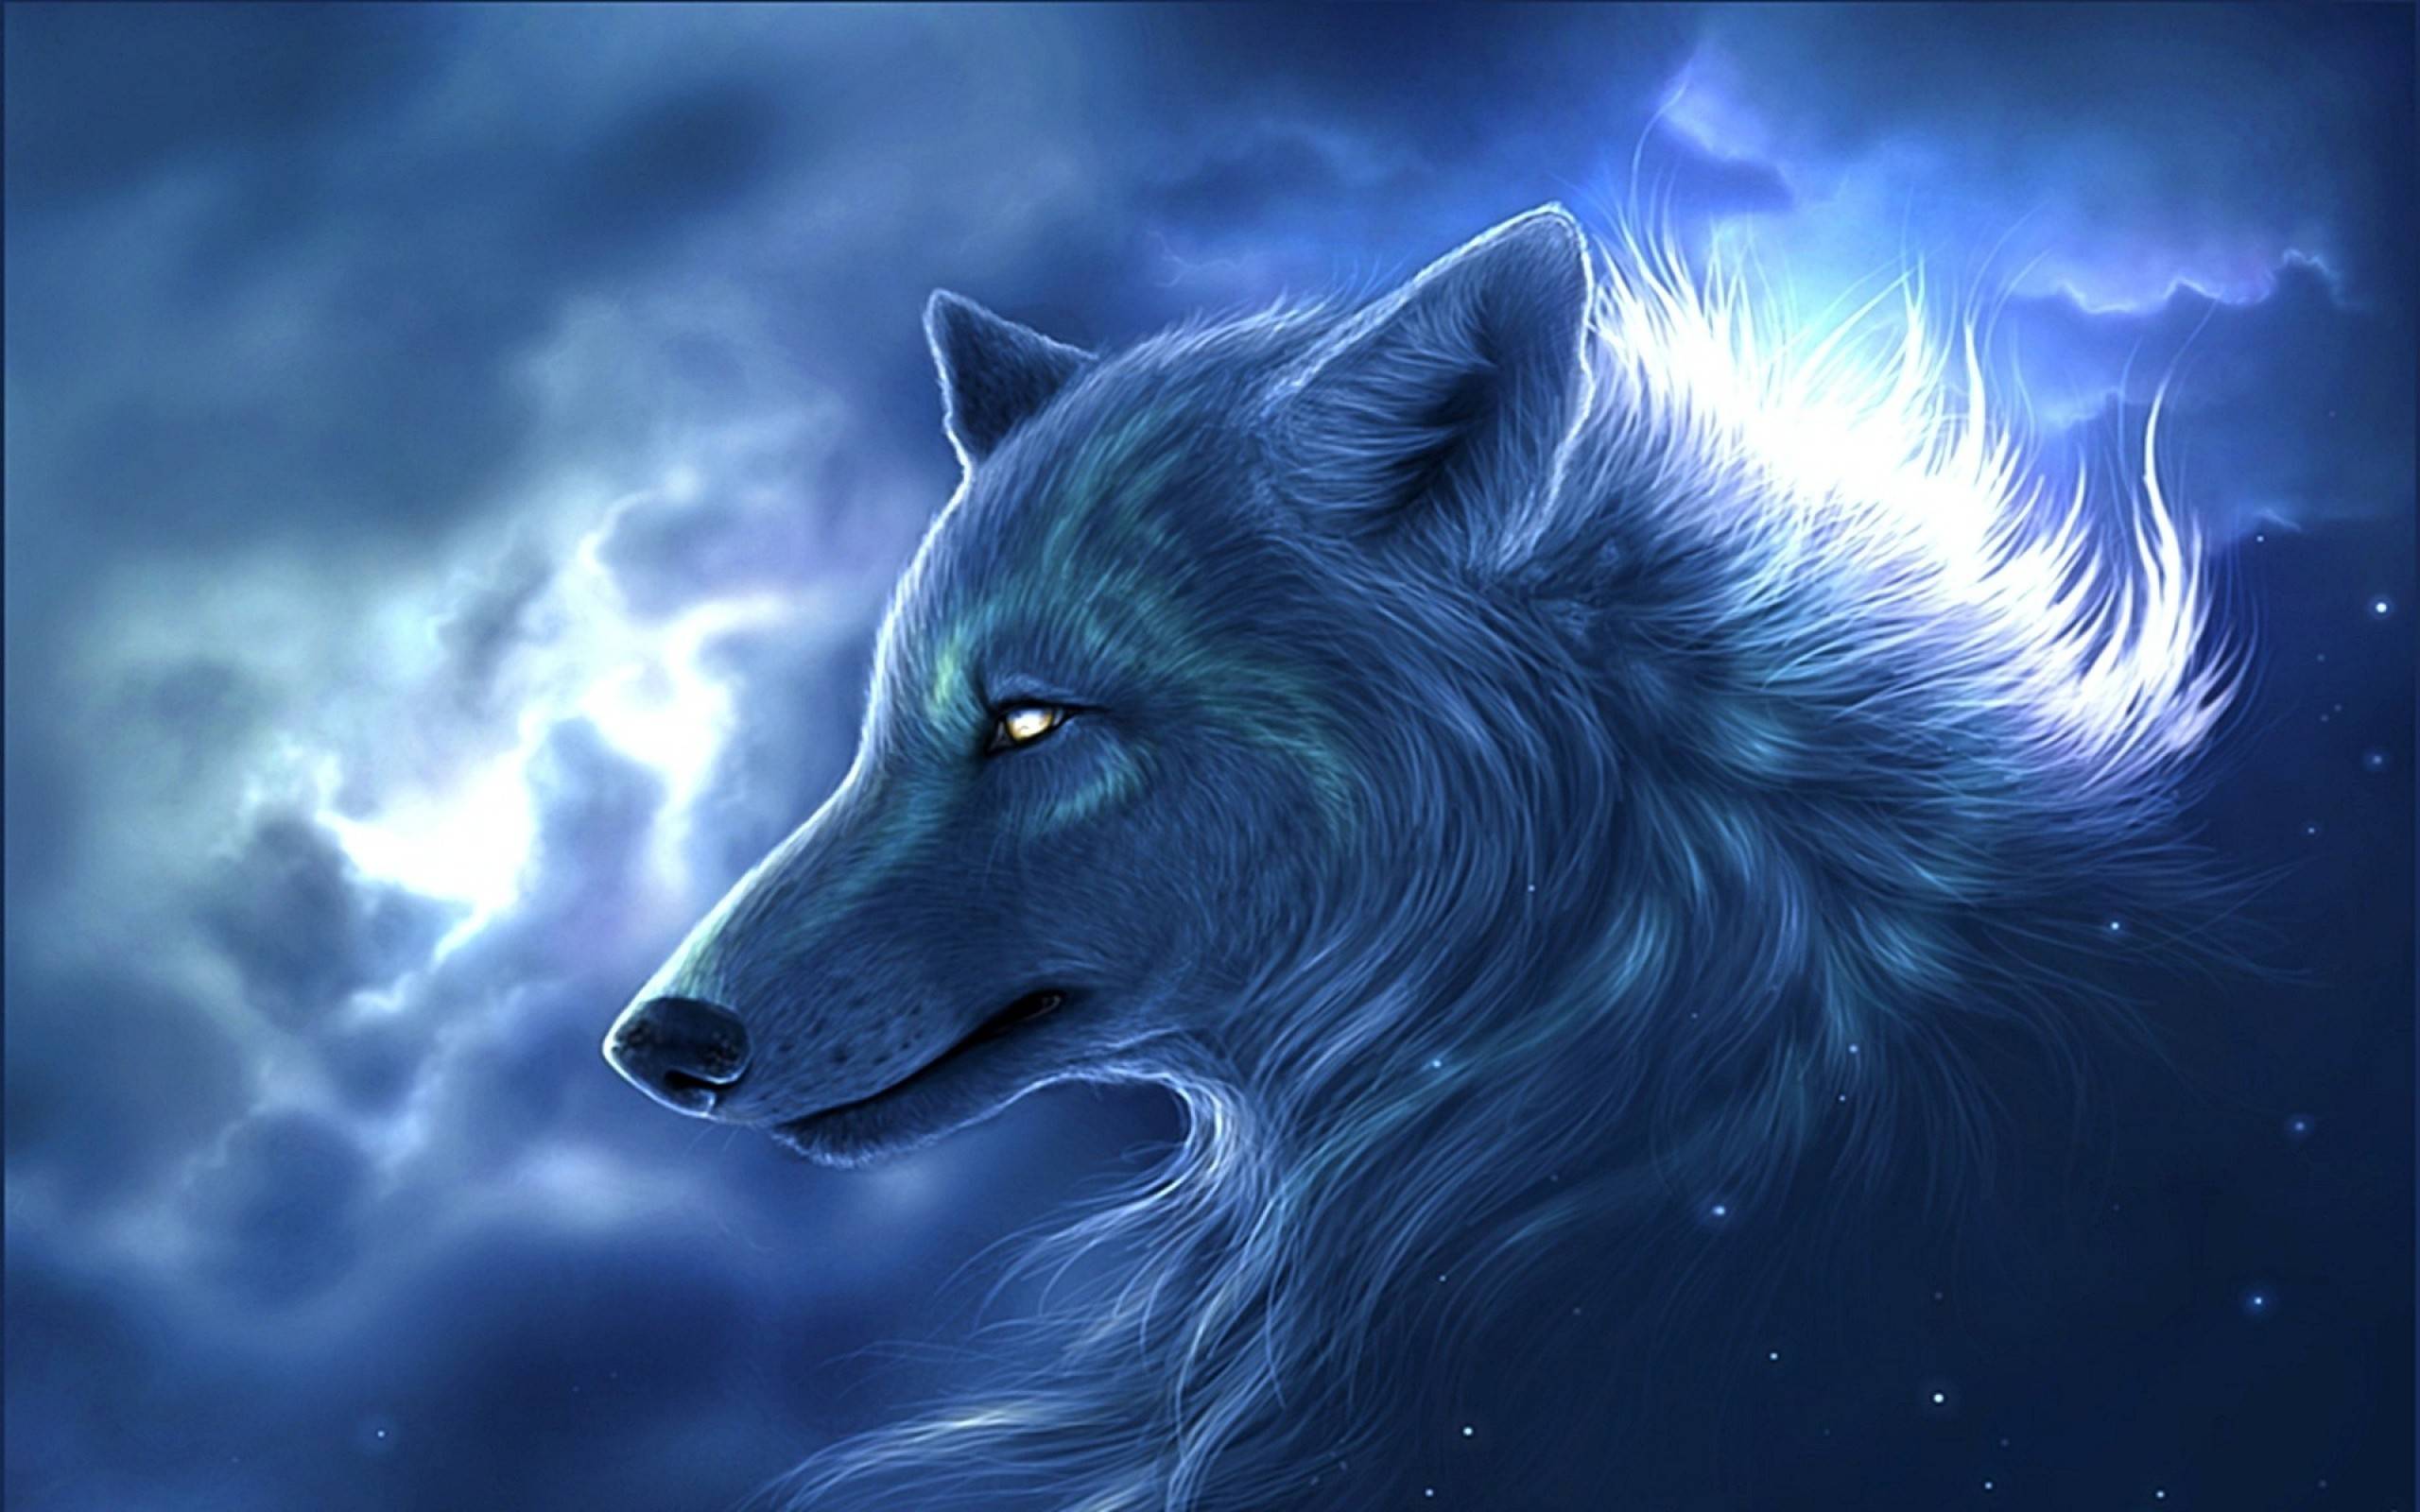 Dark Anime Wolf Sitting In A Forest In A Raincoat Background, Pictures Of  Anime Wolves, Wolves, Animal Background Image And Wallpaper for Free  Download